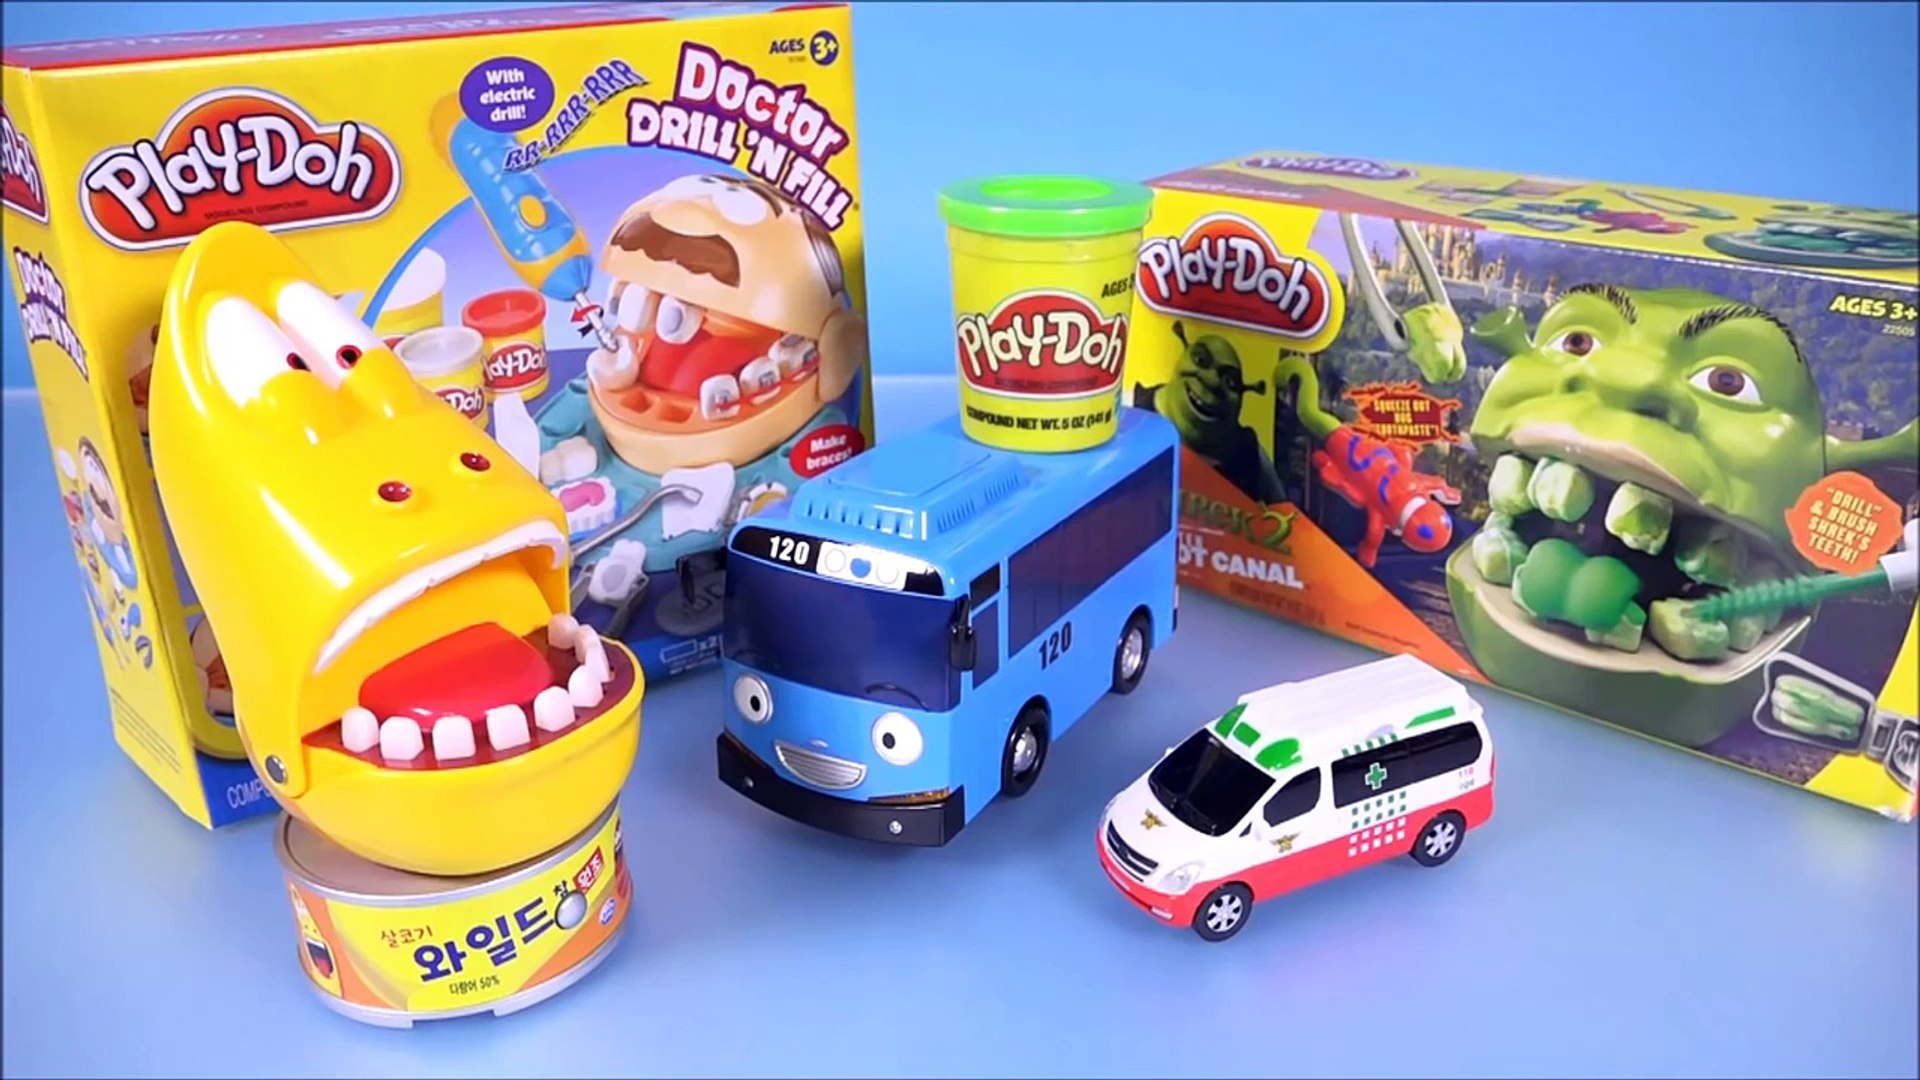 Play Doh Shrek and Doctor Drill 'N Fill Rotten Root Canal Playdough Dentist  with Tayo the little bus - video Dailymotion